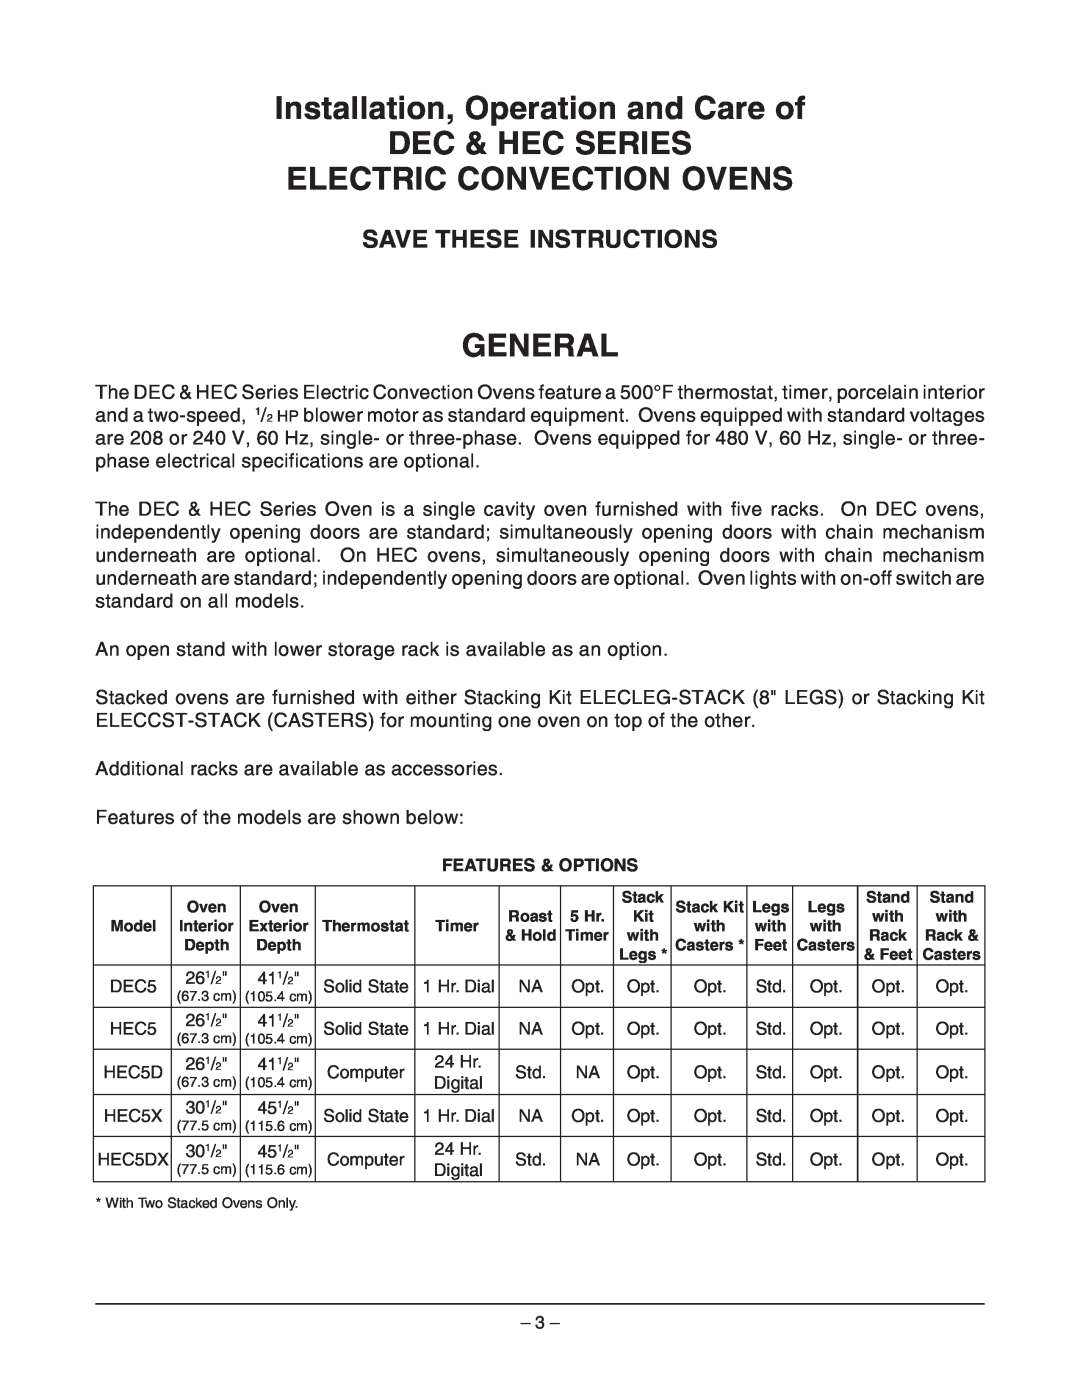 Hobart DEC5 ML-126749 manual Installation, Operation and Care of DEC & HEC SERIES, Electric Convection Ovens, General 